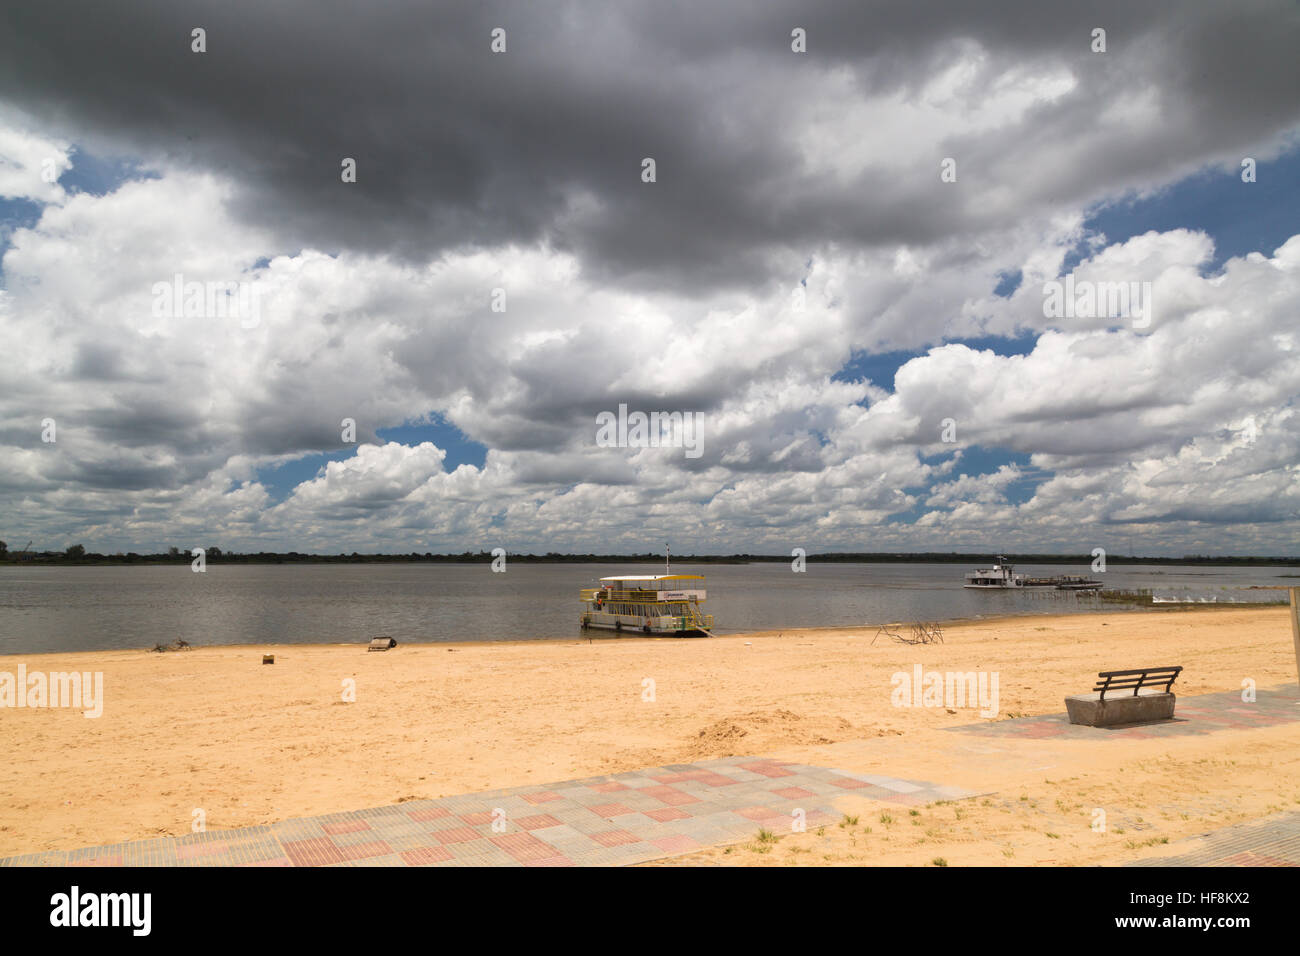 Asuncion, Paraguay. 29th December, 2016. Heavy clouds above the Bahia de Asuncion (Asuncion Bay) and Rio (River) Paraguay is seen during hot afternoon in Asuncion city-centre, Paraguay. © Andre M. Chang/ARDUOPRESS/Alamy Live News Stock Photo